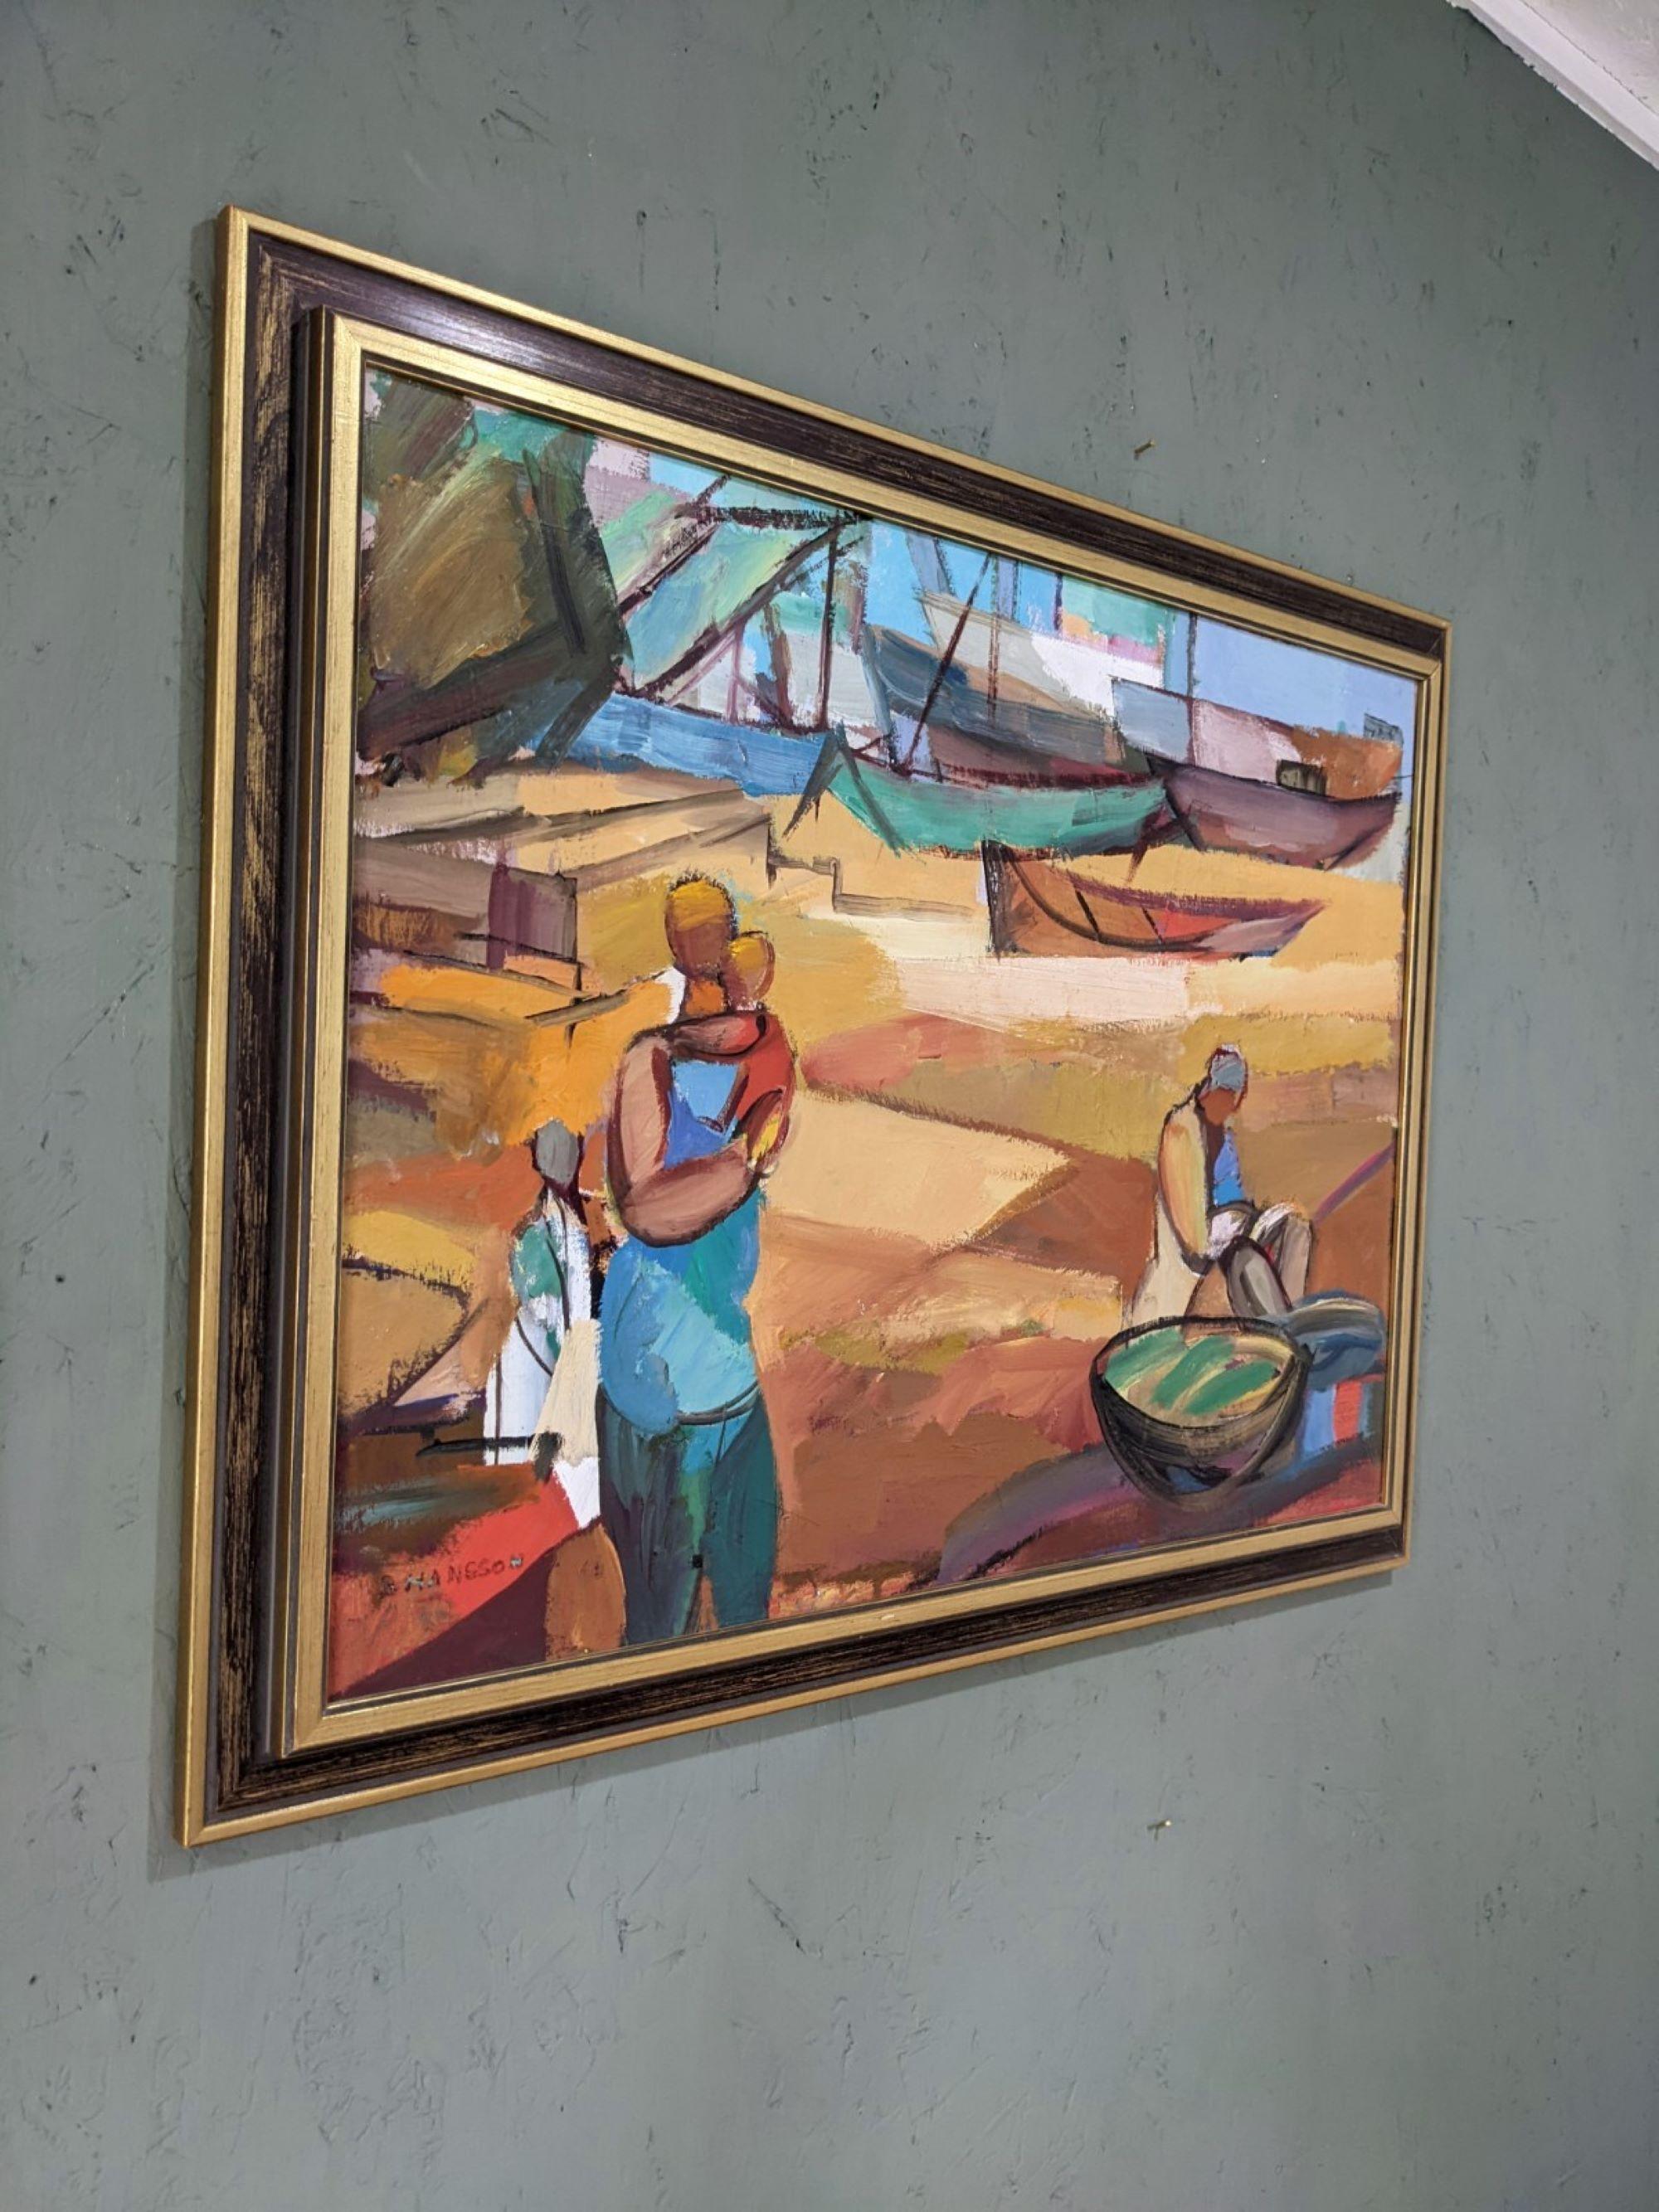 FISHING BOATS
Size: 46 x 59 cm (including frame)
Oil on board

A heart warming and very well executed mid century modernist fishing village scene, painted in oil onto board, by the established female Swedish artist Brita Hansson (1918-1979).

A warm